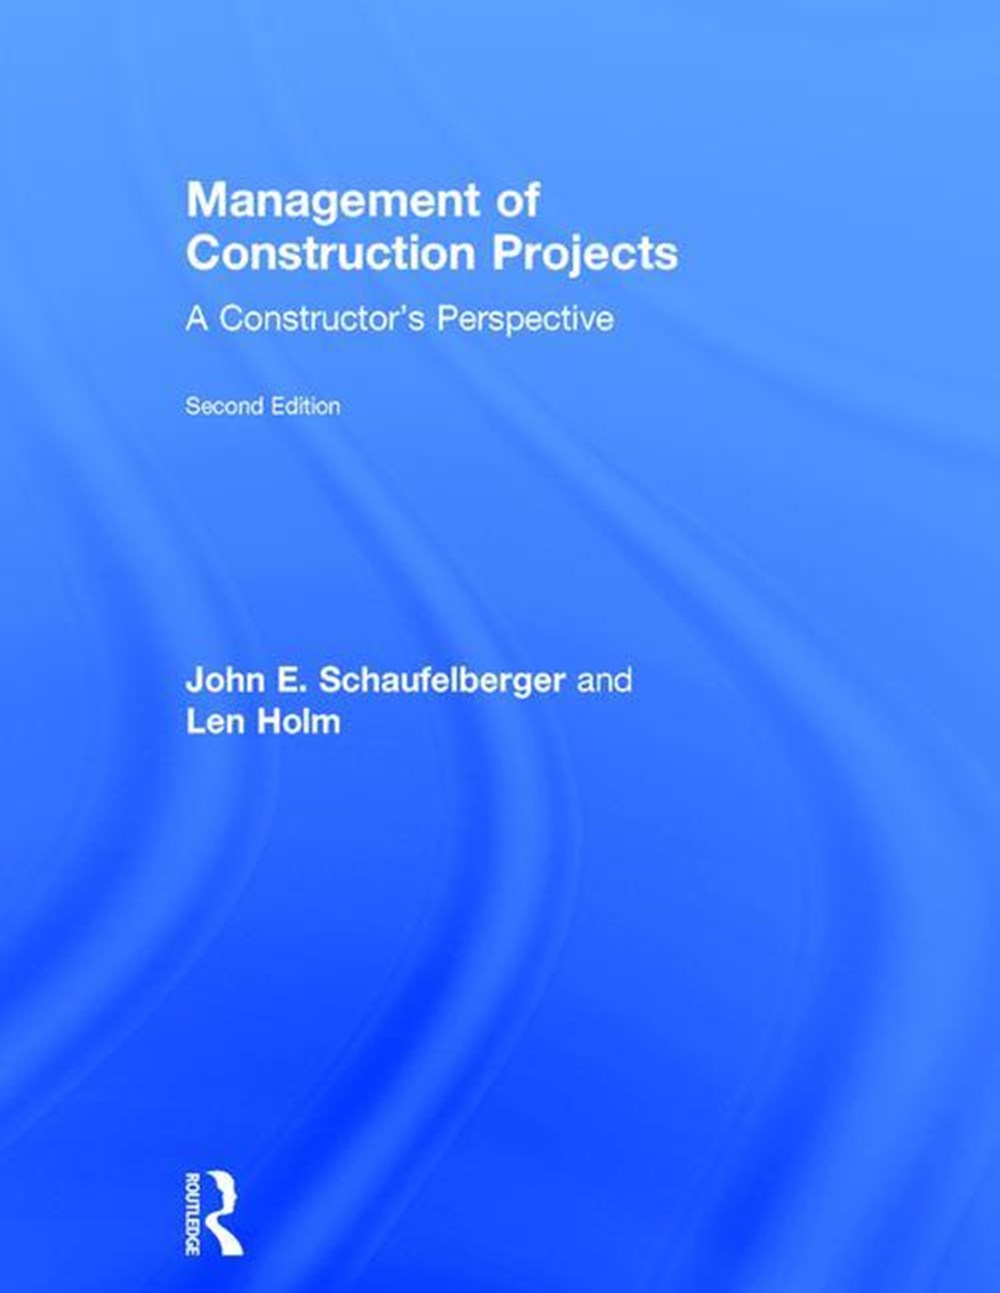 Management of Construction Projects: A Constructor's Perspective